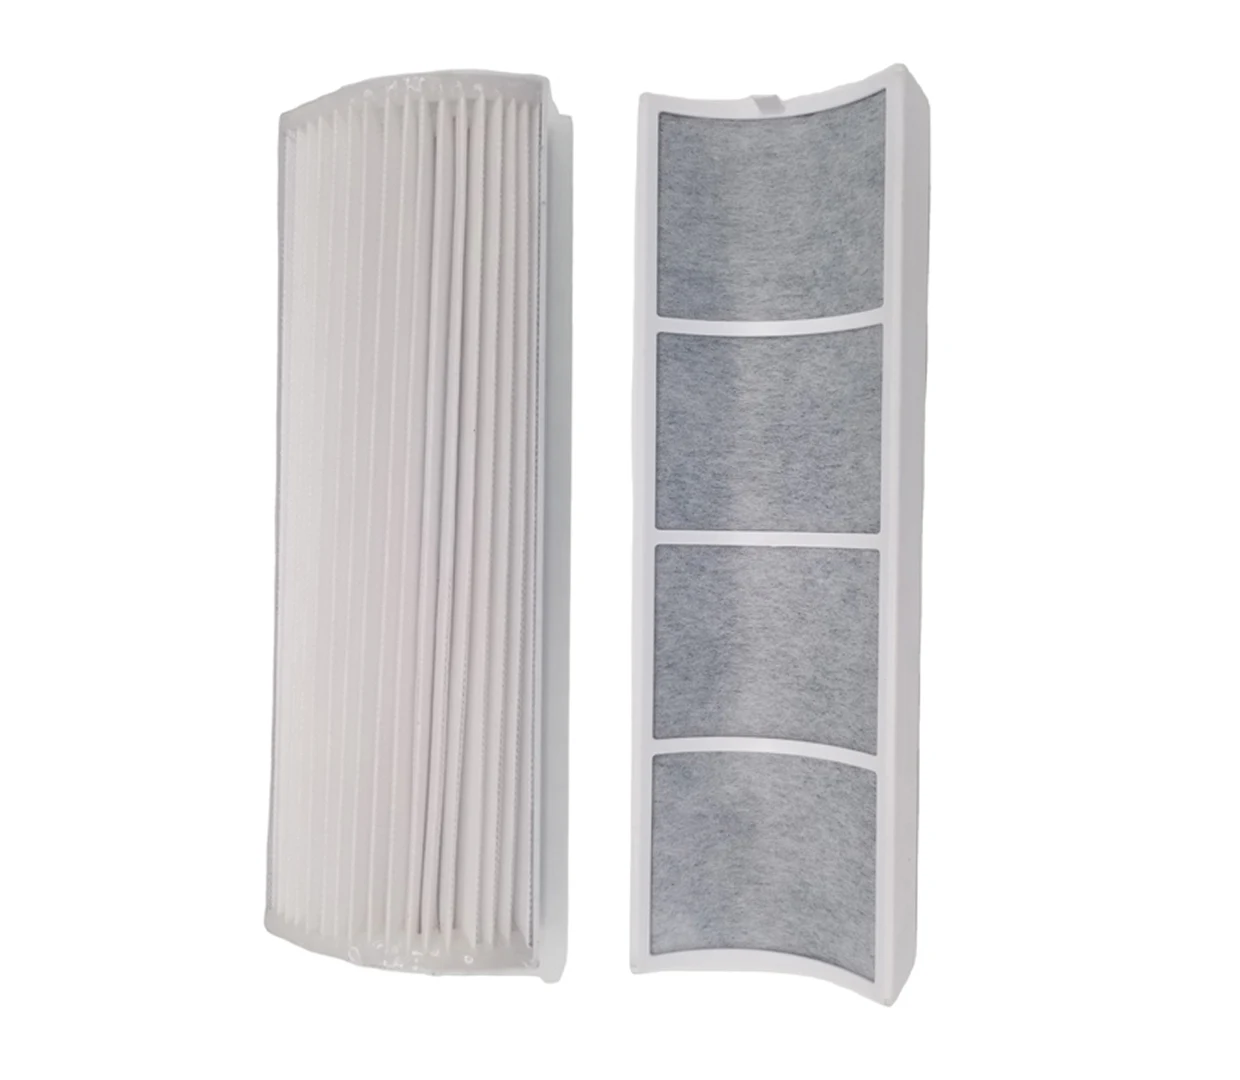 Cheap Price High Quality Air Purifier Filter Element Replacement For Envion Therapure Tpp220f Tpp220h Tpp220m Purifier Parts